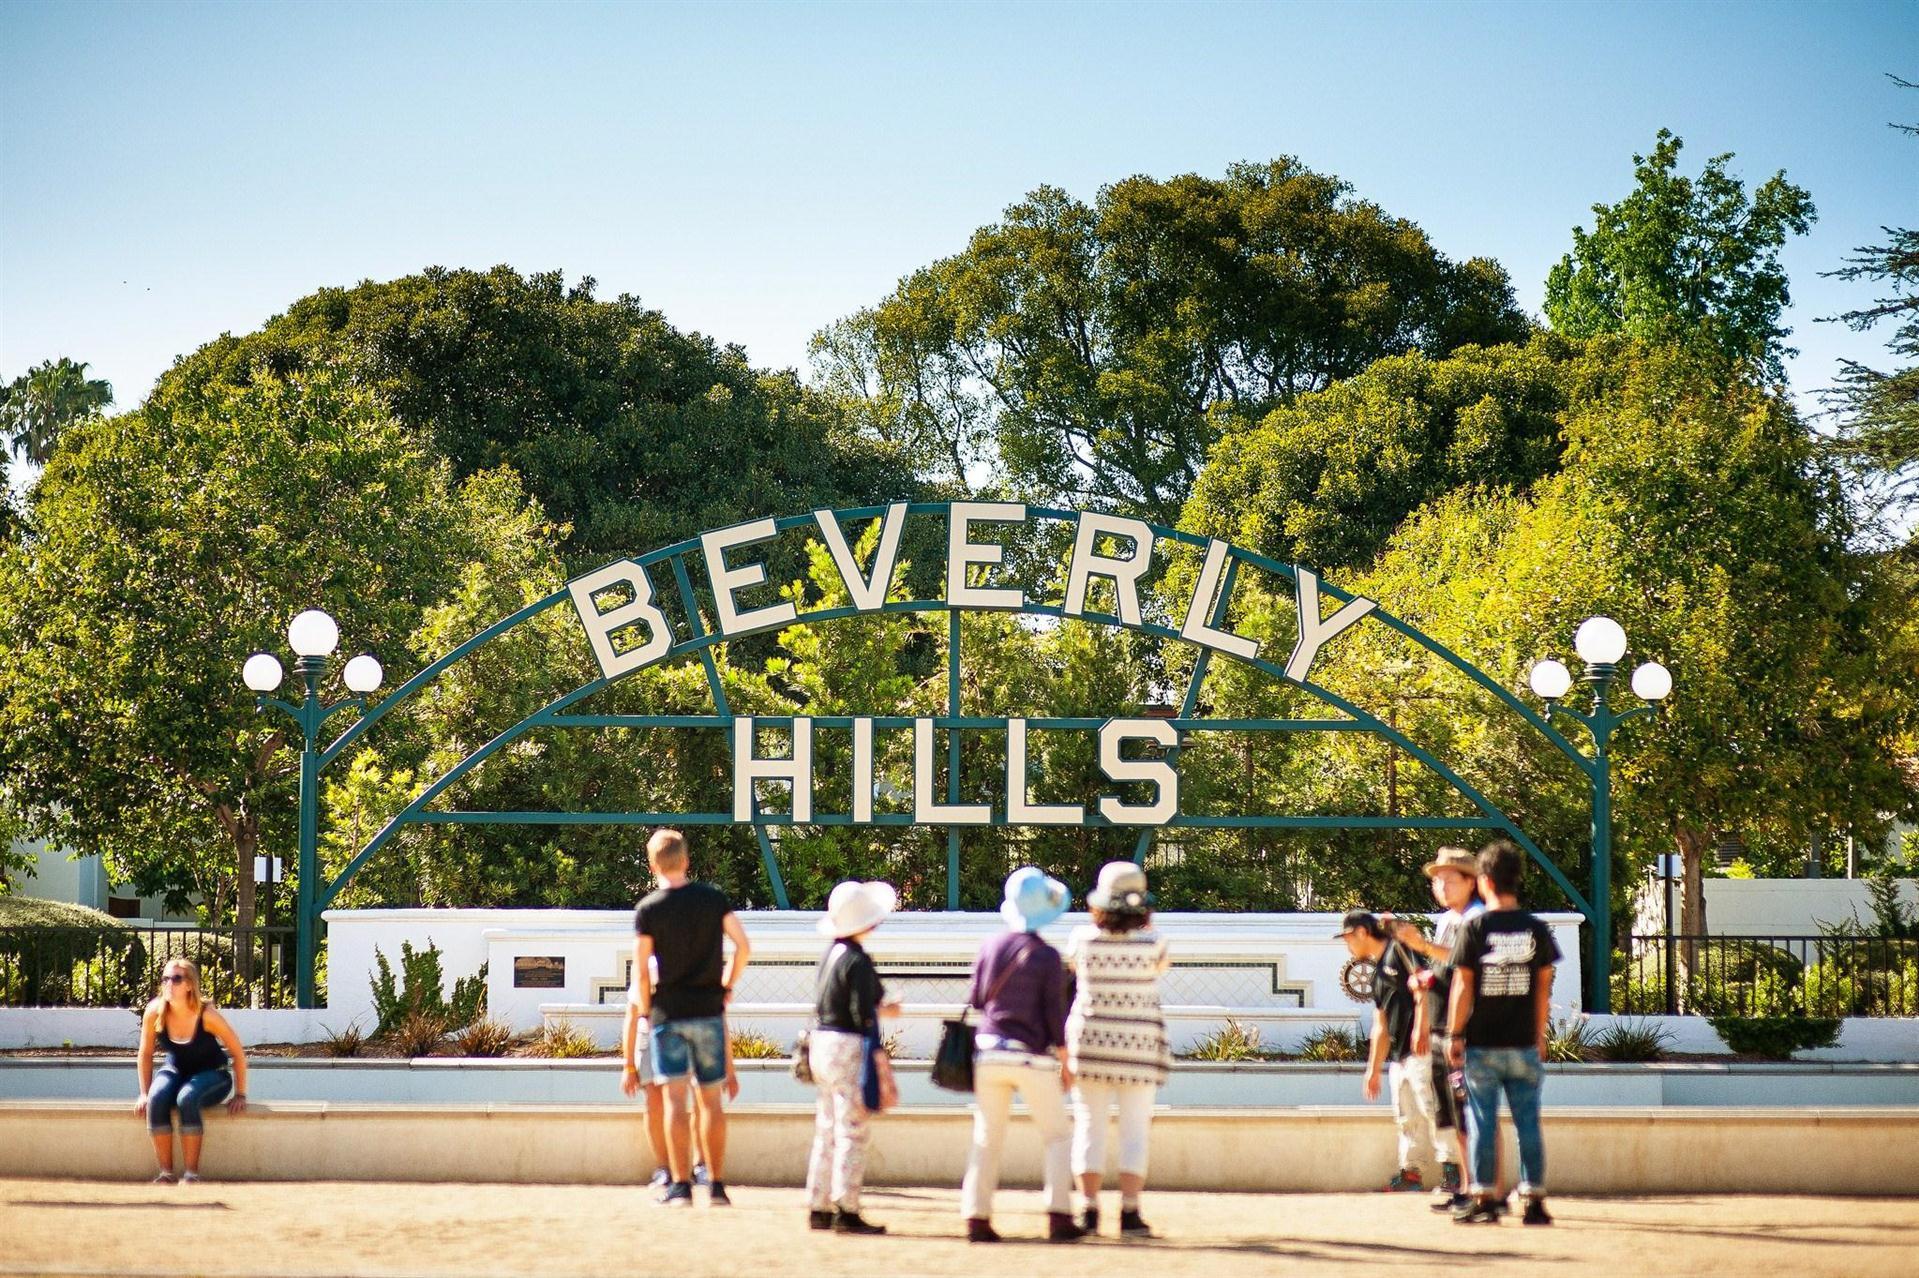 Beverly Hills Conference & Visitors Bureau in Beverly Hills, CA